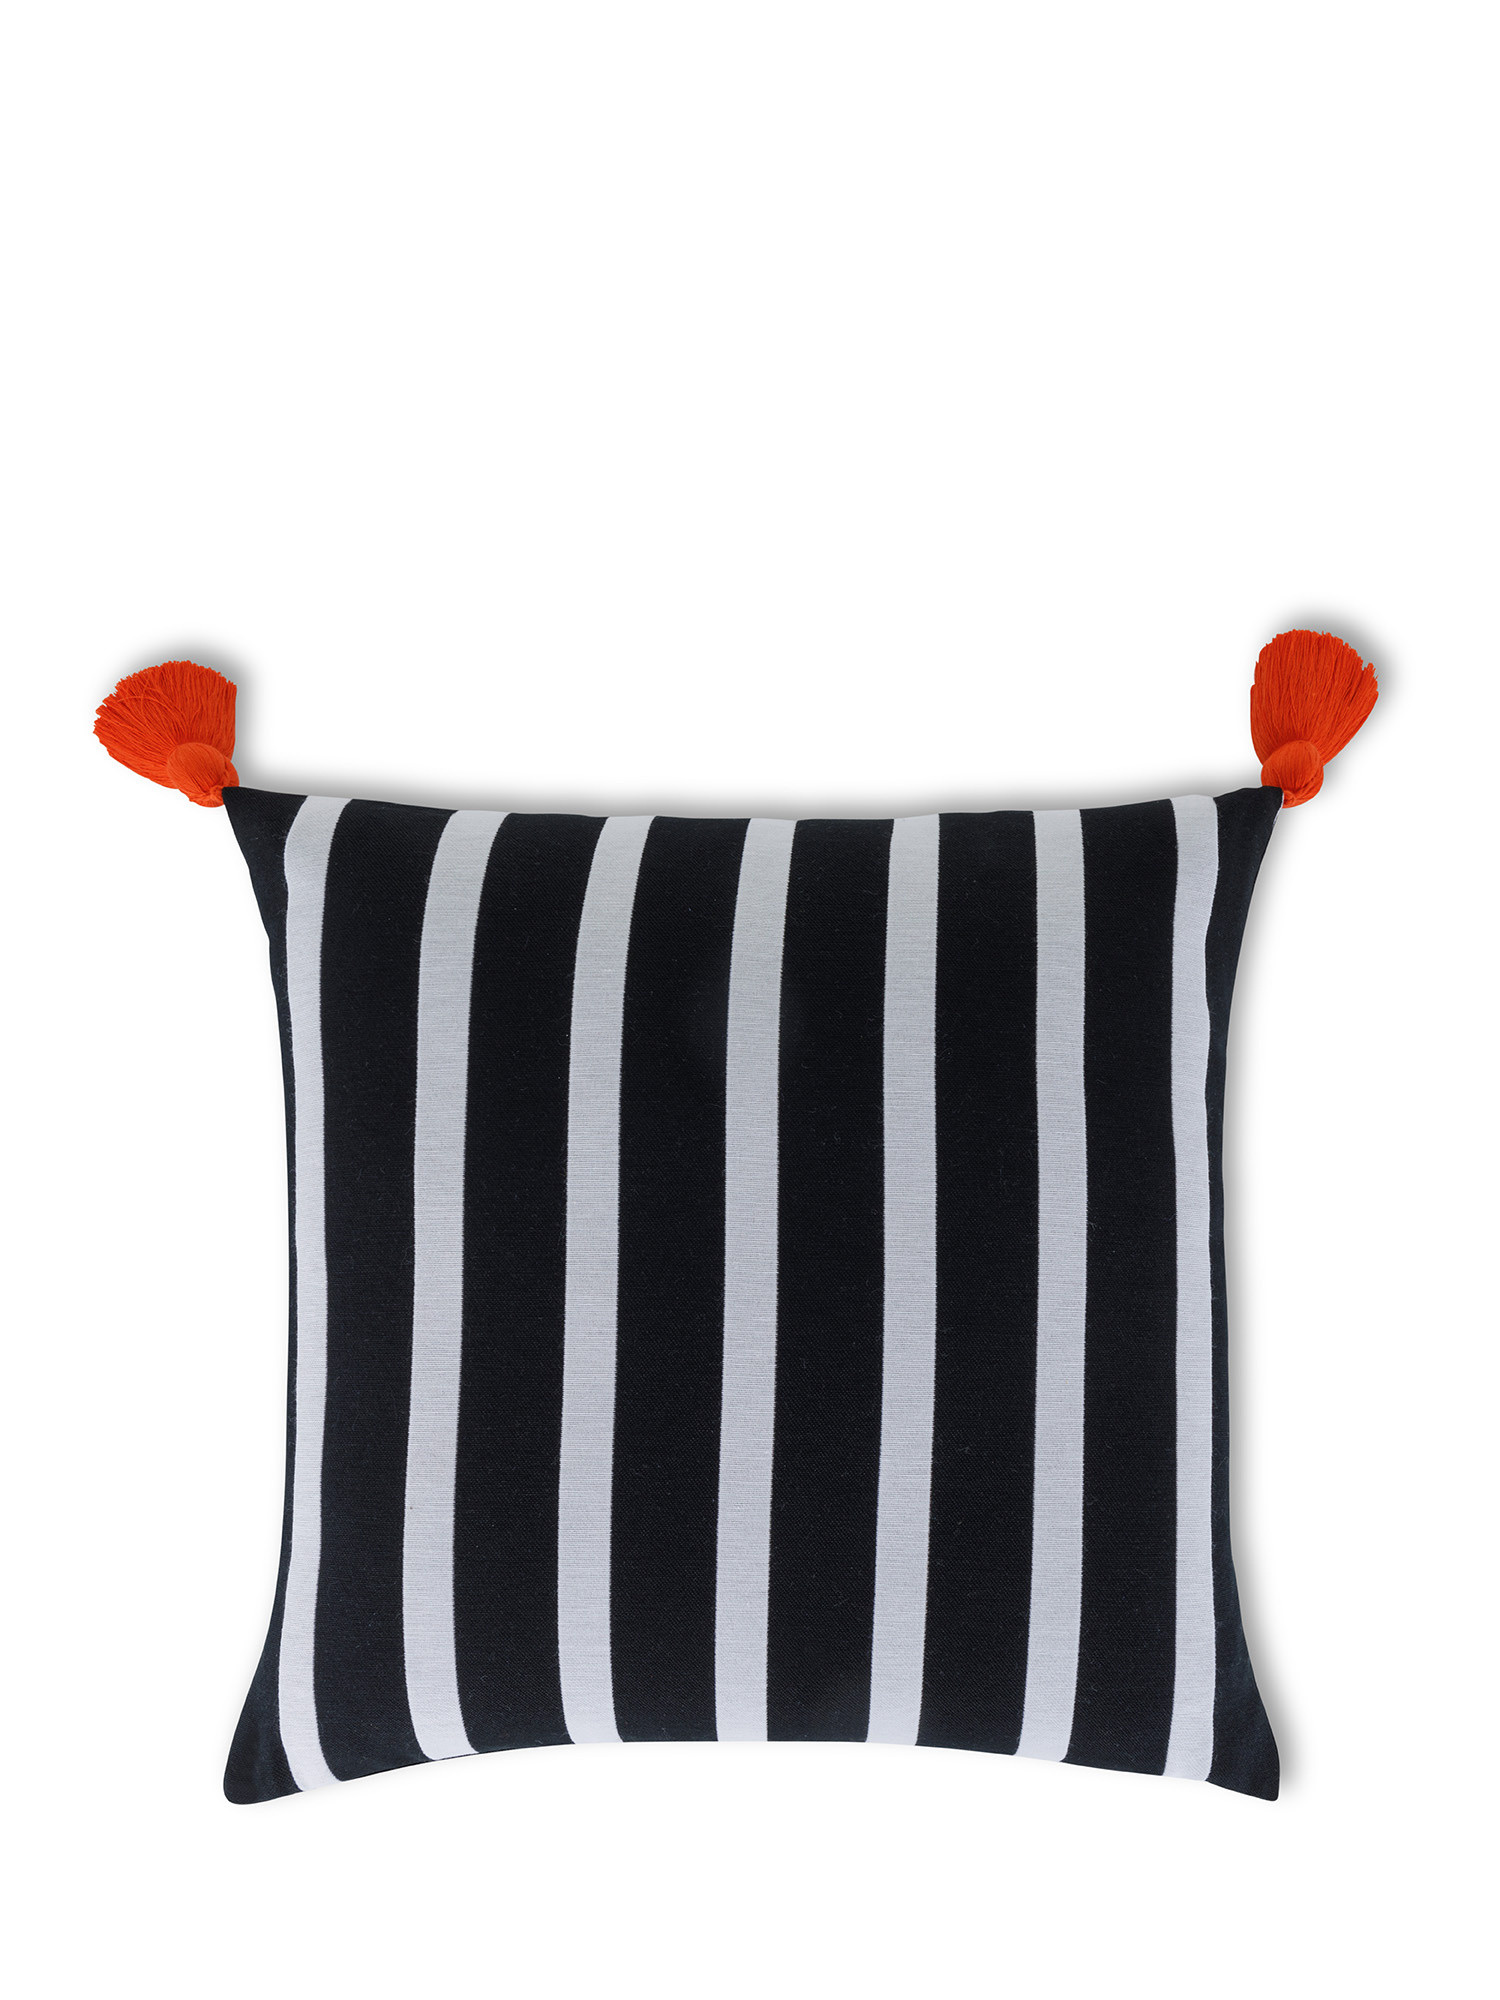 Striped cushion with tassels 45x45 cm, Black, large image number 0